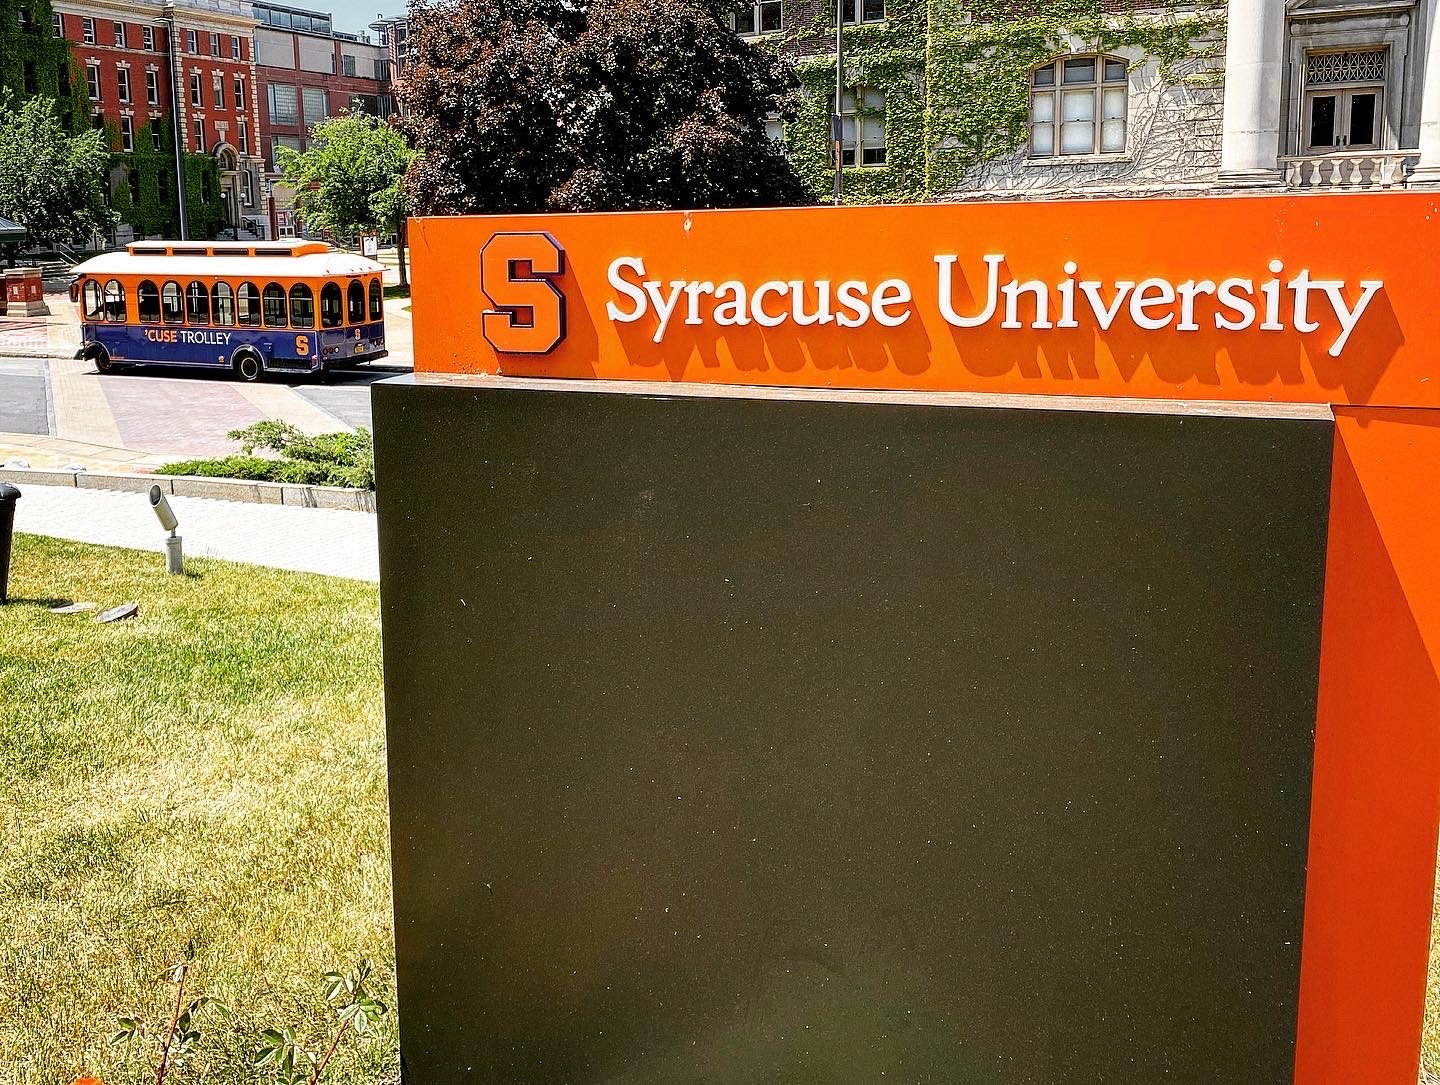 Syracuse University sign in the foreground and a Cuse Trolley in the background.